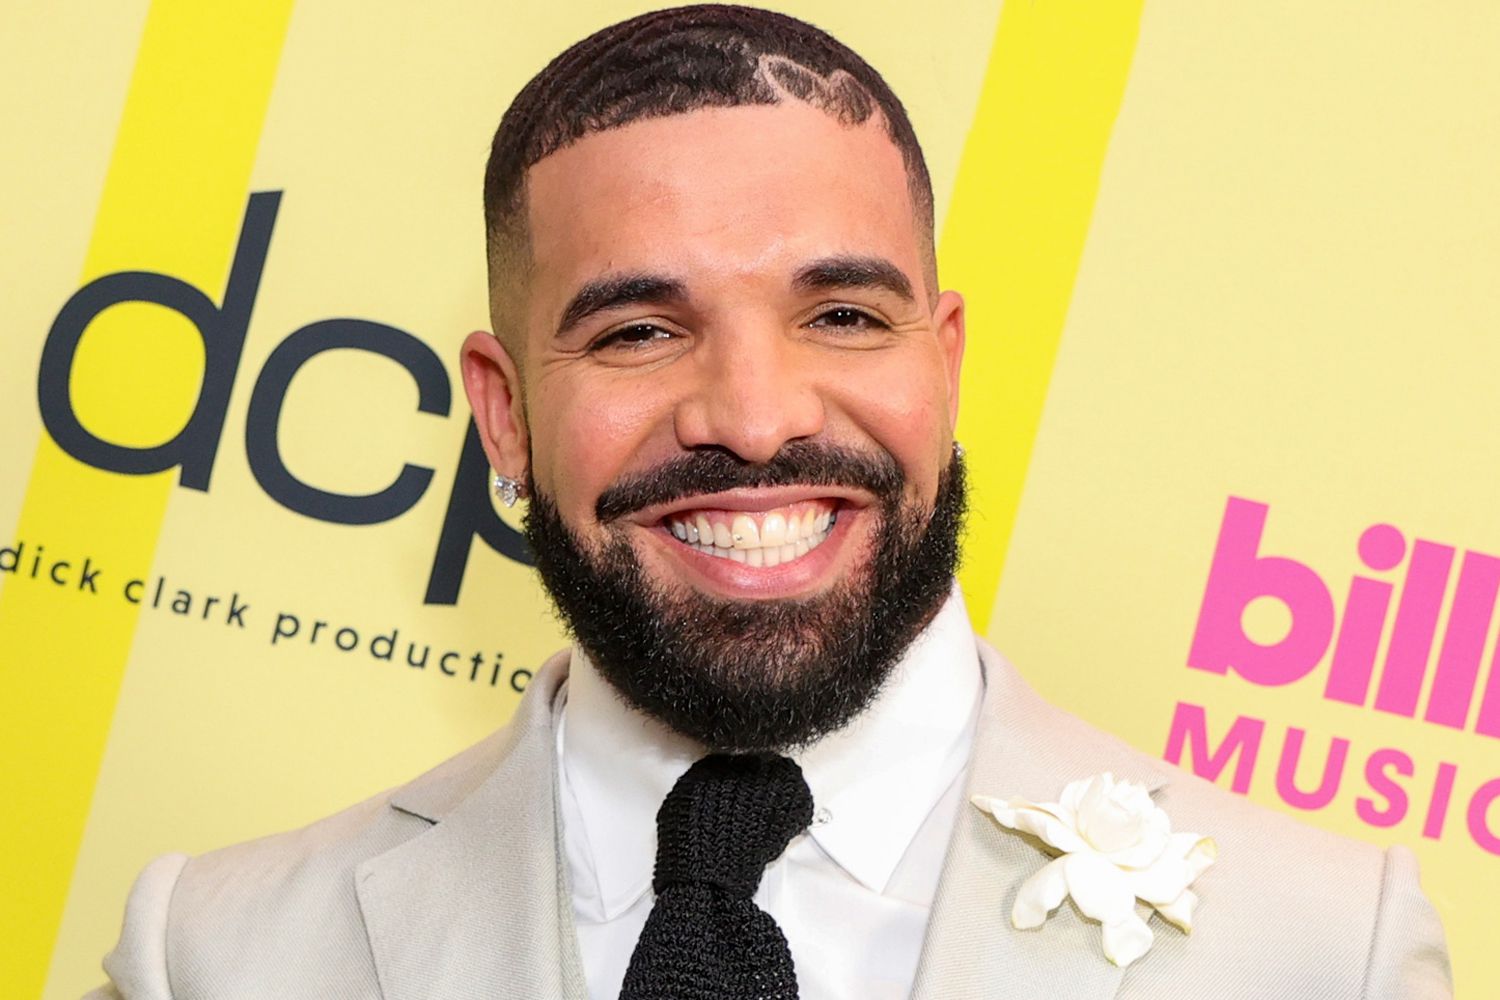 Contemplating A Break: Drake Says He’s Taking A Step Back From Music